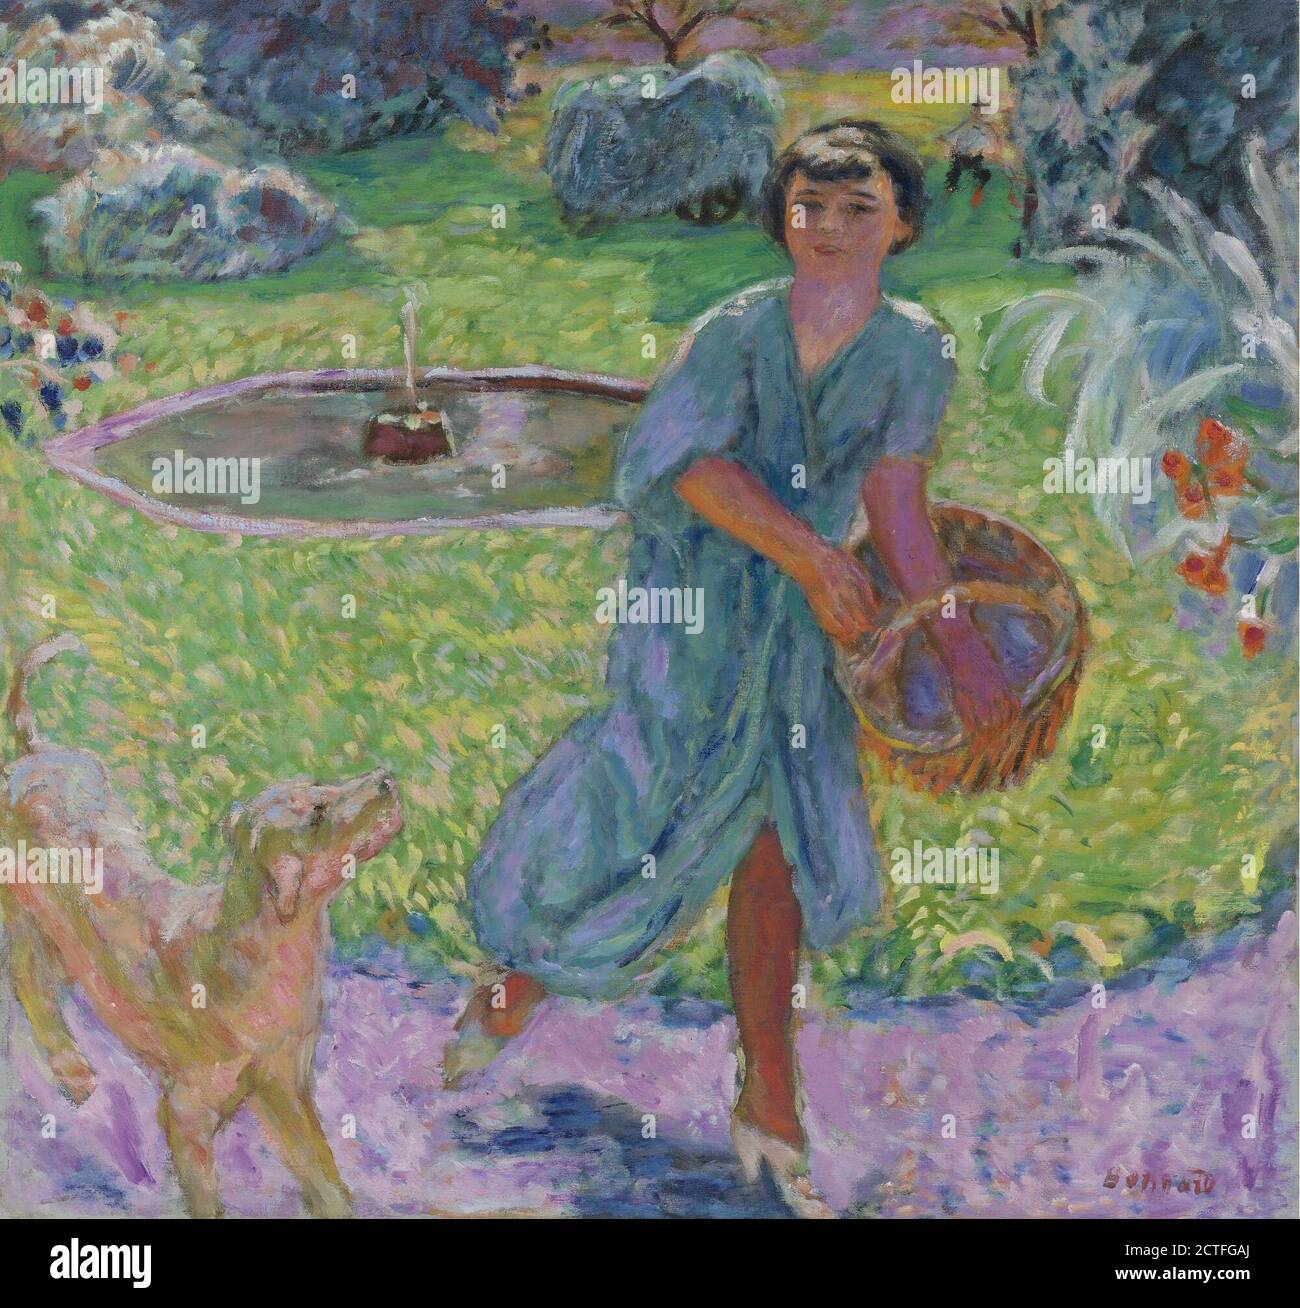 Pierre Bonnard 1867 - 1947  JEUNE FILLE JOUANT AVEC UN CHIEN (VIVETTE TERRASSE)  Signed Bonnard (lower right)  Oil on canvas  29 1/2 by 31 1/2 in.  75 by 80 cm  Painted in 1913.Bonnard's niece, Vivette Terrasse, appears in the garden of the family home at Grand-Lemps. Seen in full figure with basket in hand, she runs along a path with a scampering dog beside. Pressed close to the picture plane, with paws and feet touching the painting's lower edge, they appear poised to leap into our space, while the garden with its fountain and foliage stretches away behind them. Conflating the genres of port Stock Photo